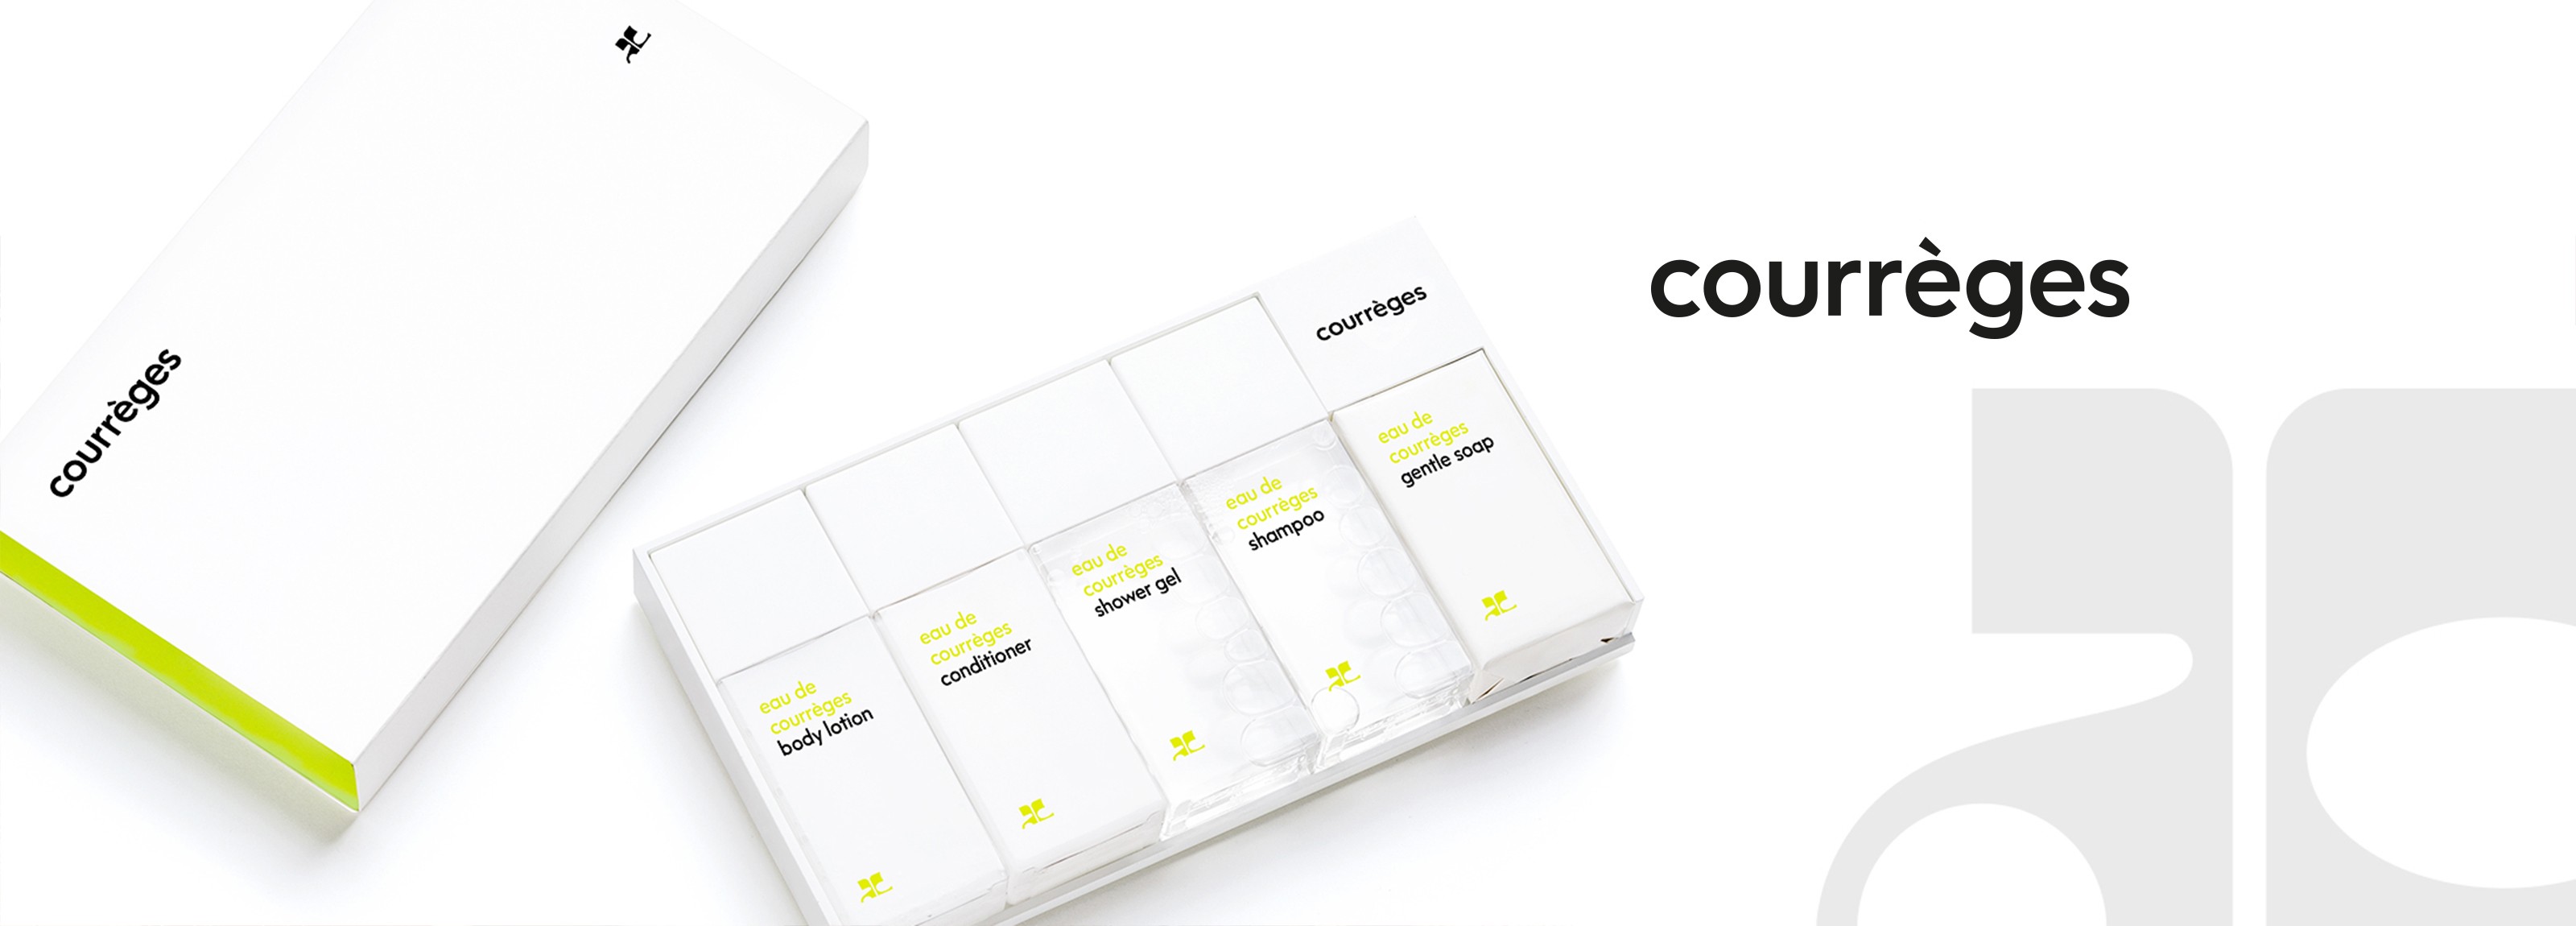 courreges bathroom products and logo